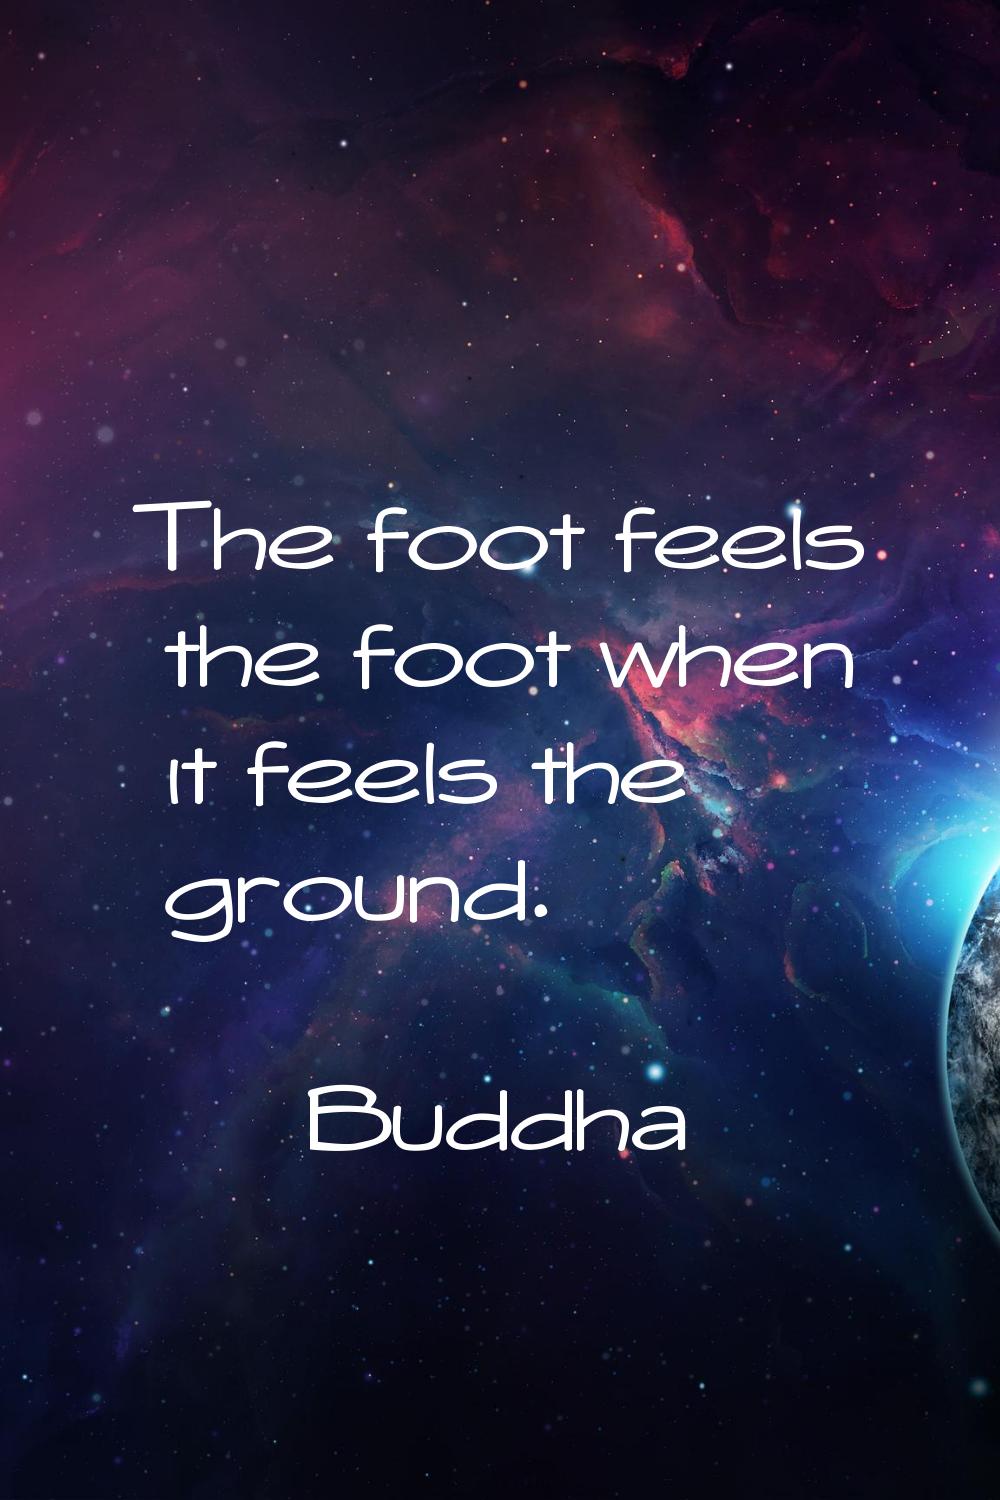 The foot feels the foot when it feels the ground.